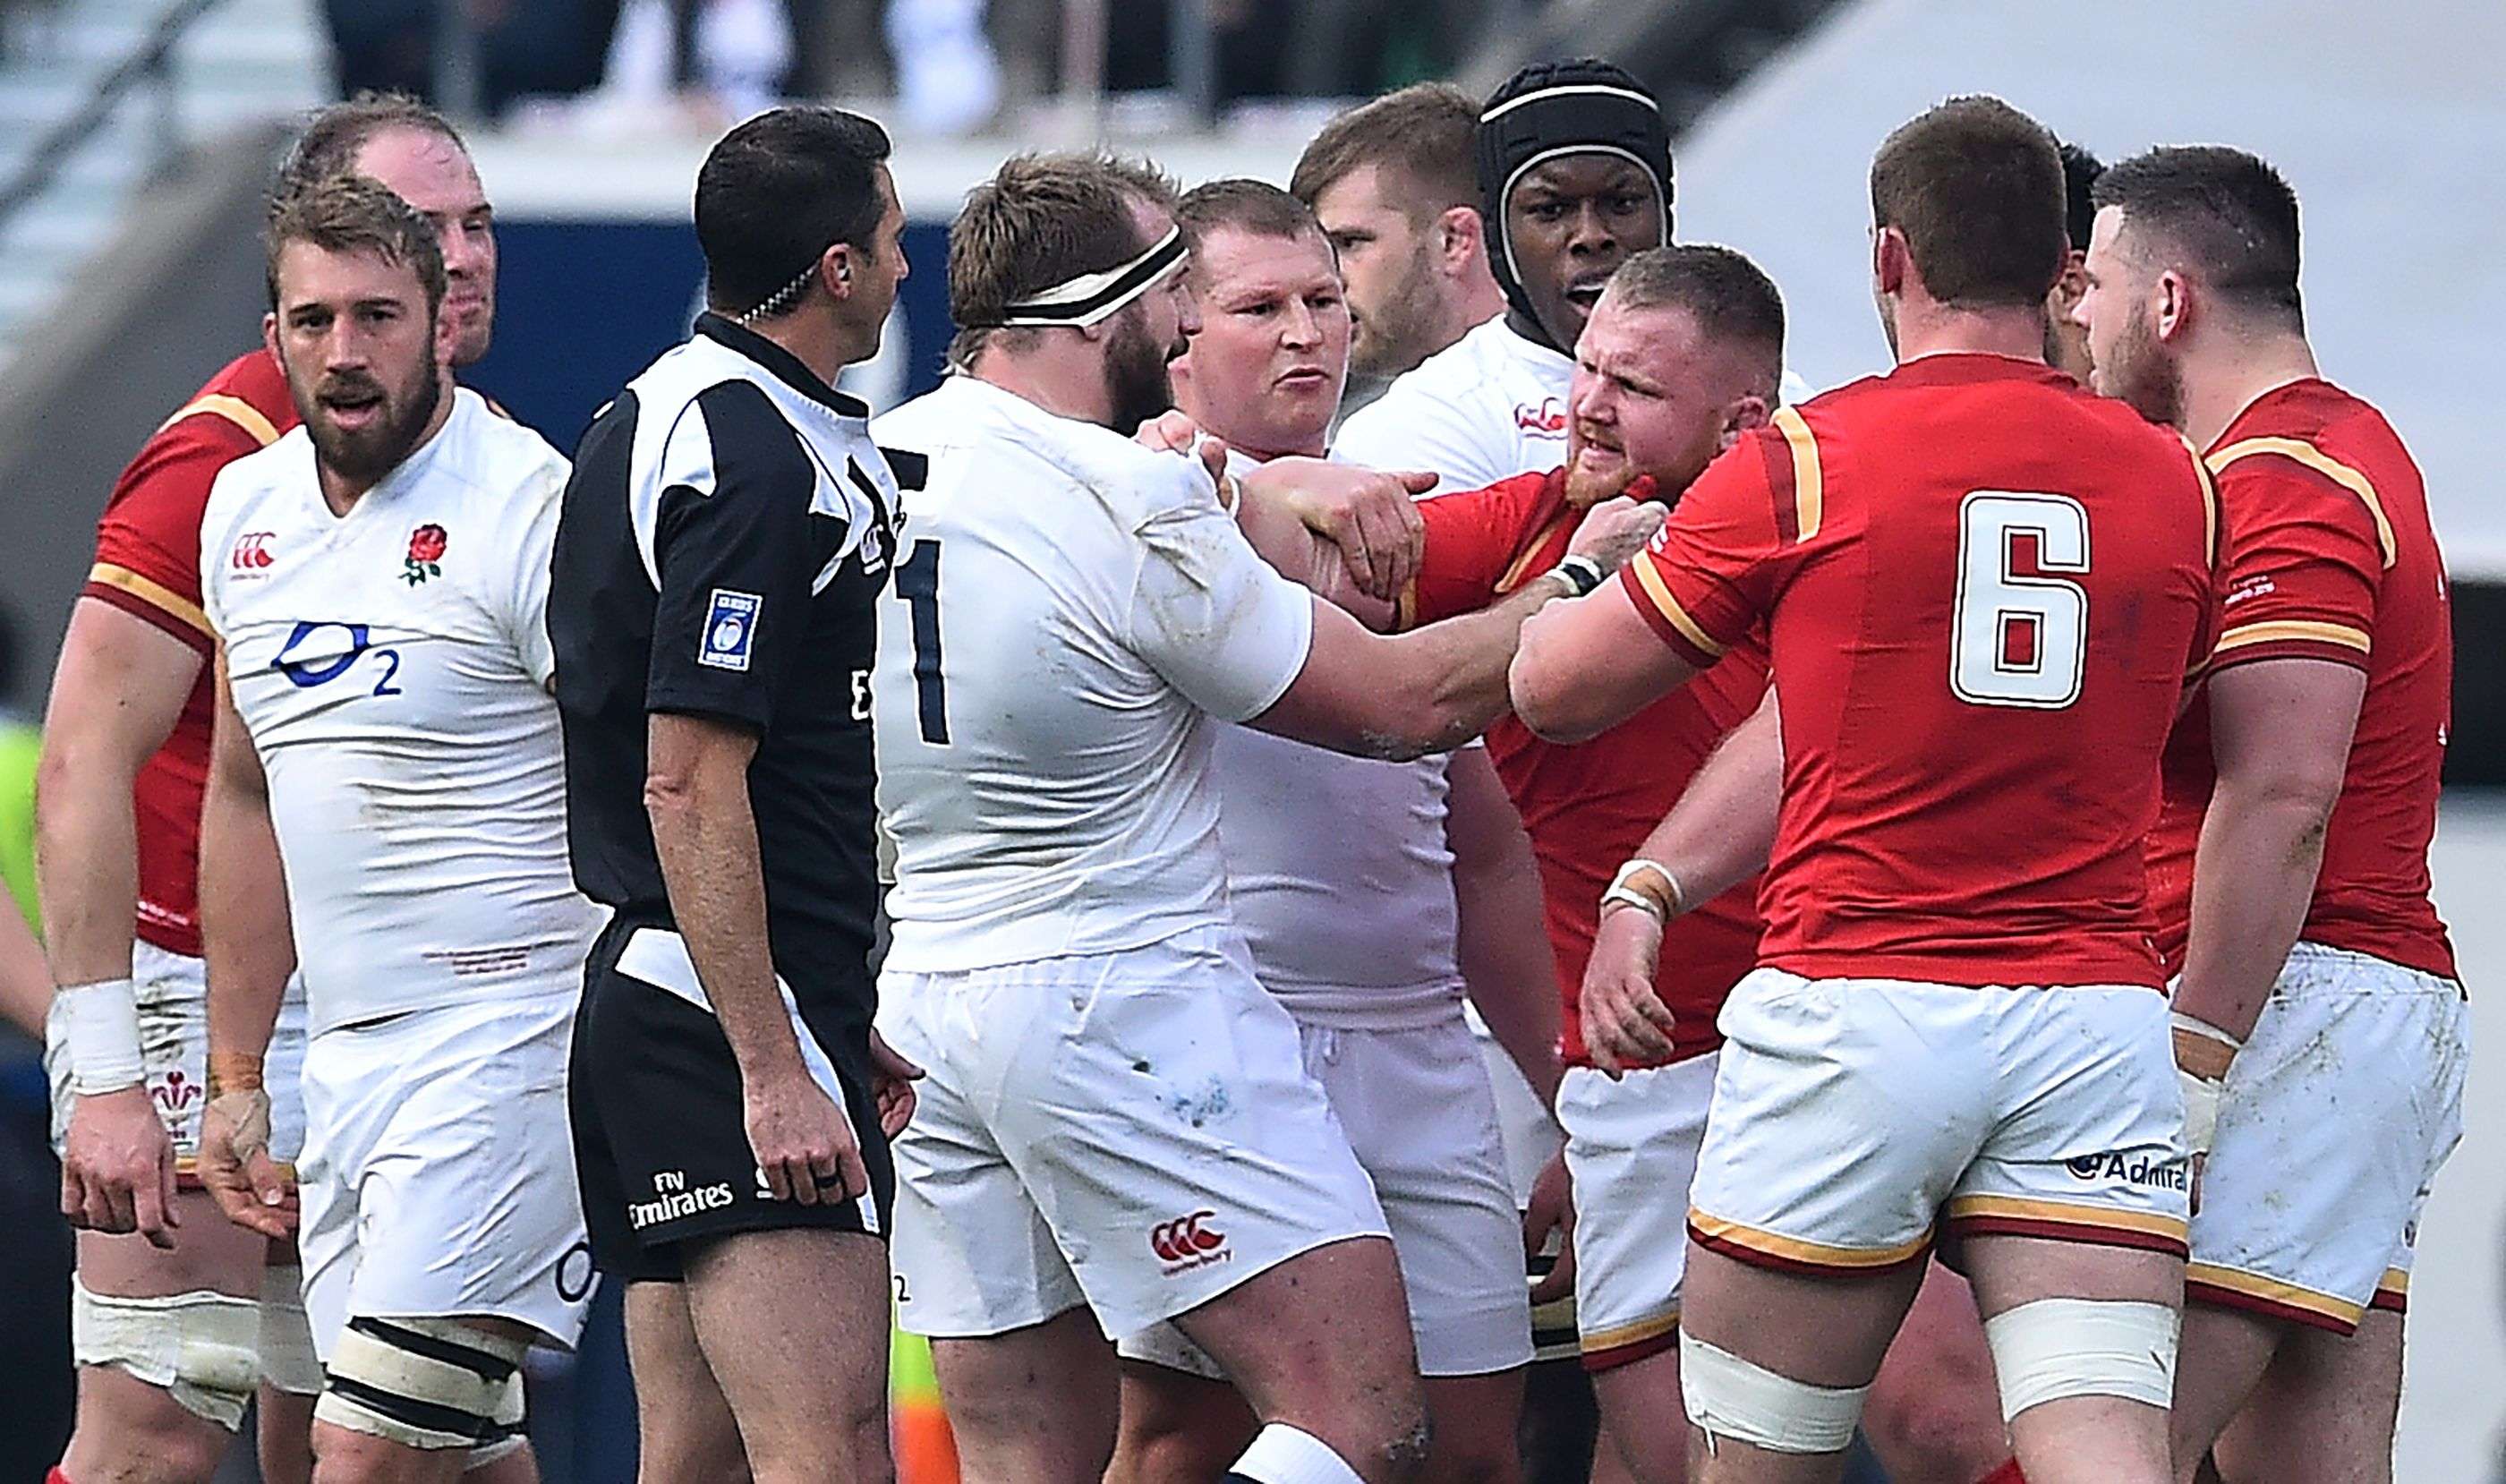 The clash between England prop Joe Marler (centre) and Wales prop Samson Lee in their Six Nations match that gave rise the the “gypsy boy” remark. Photo: AFP